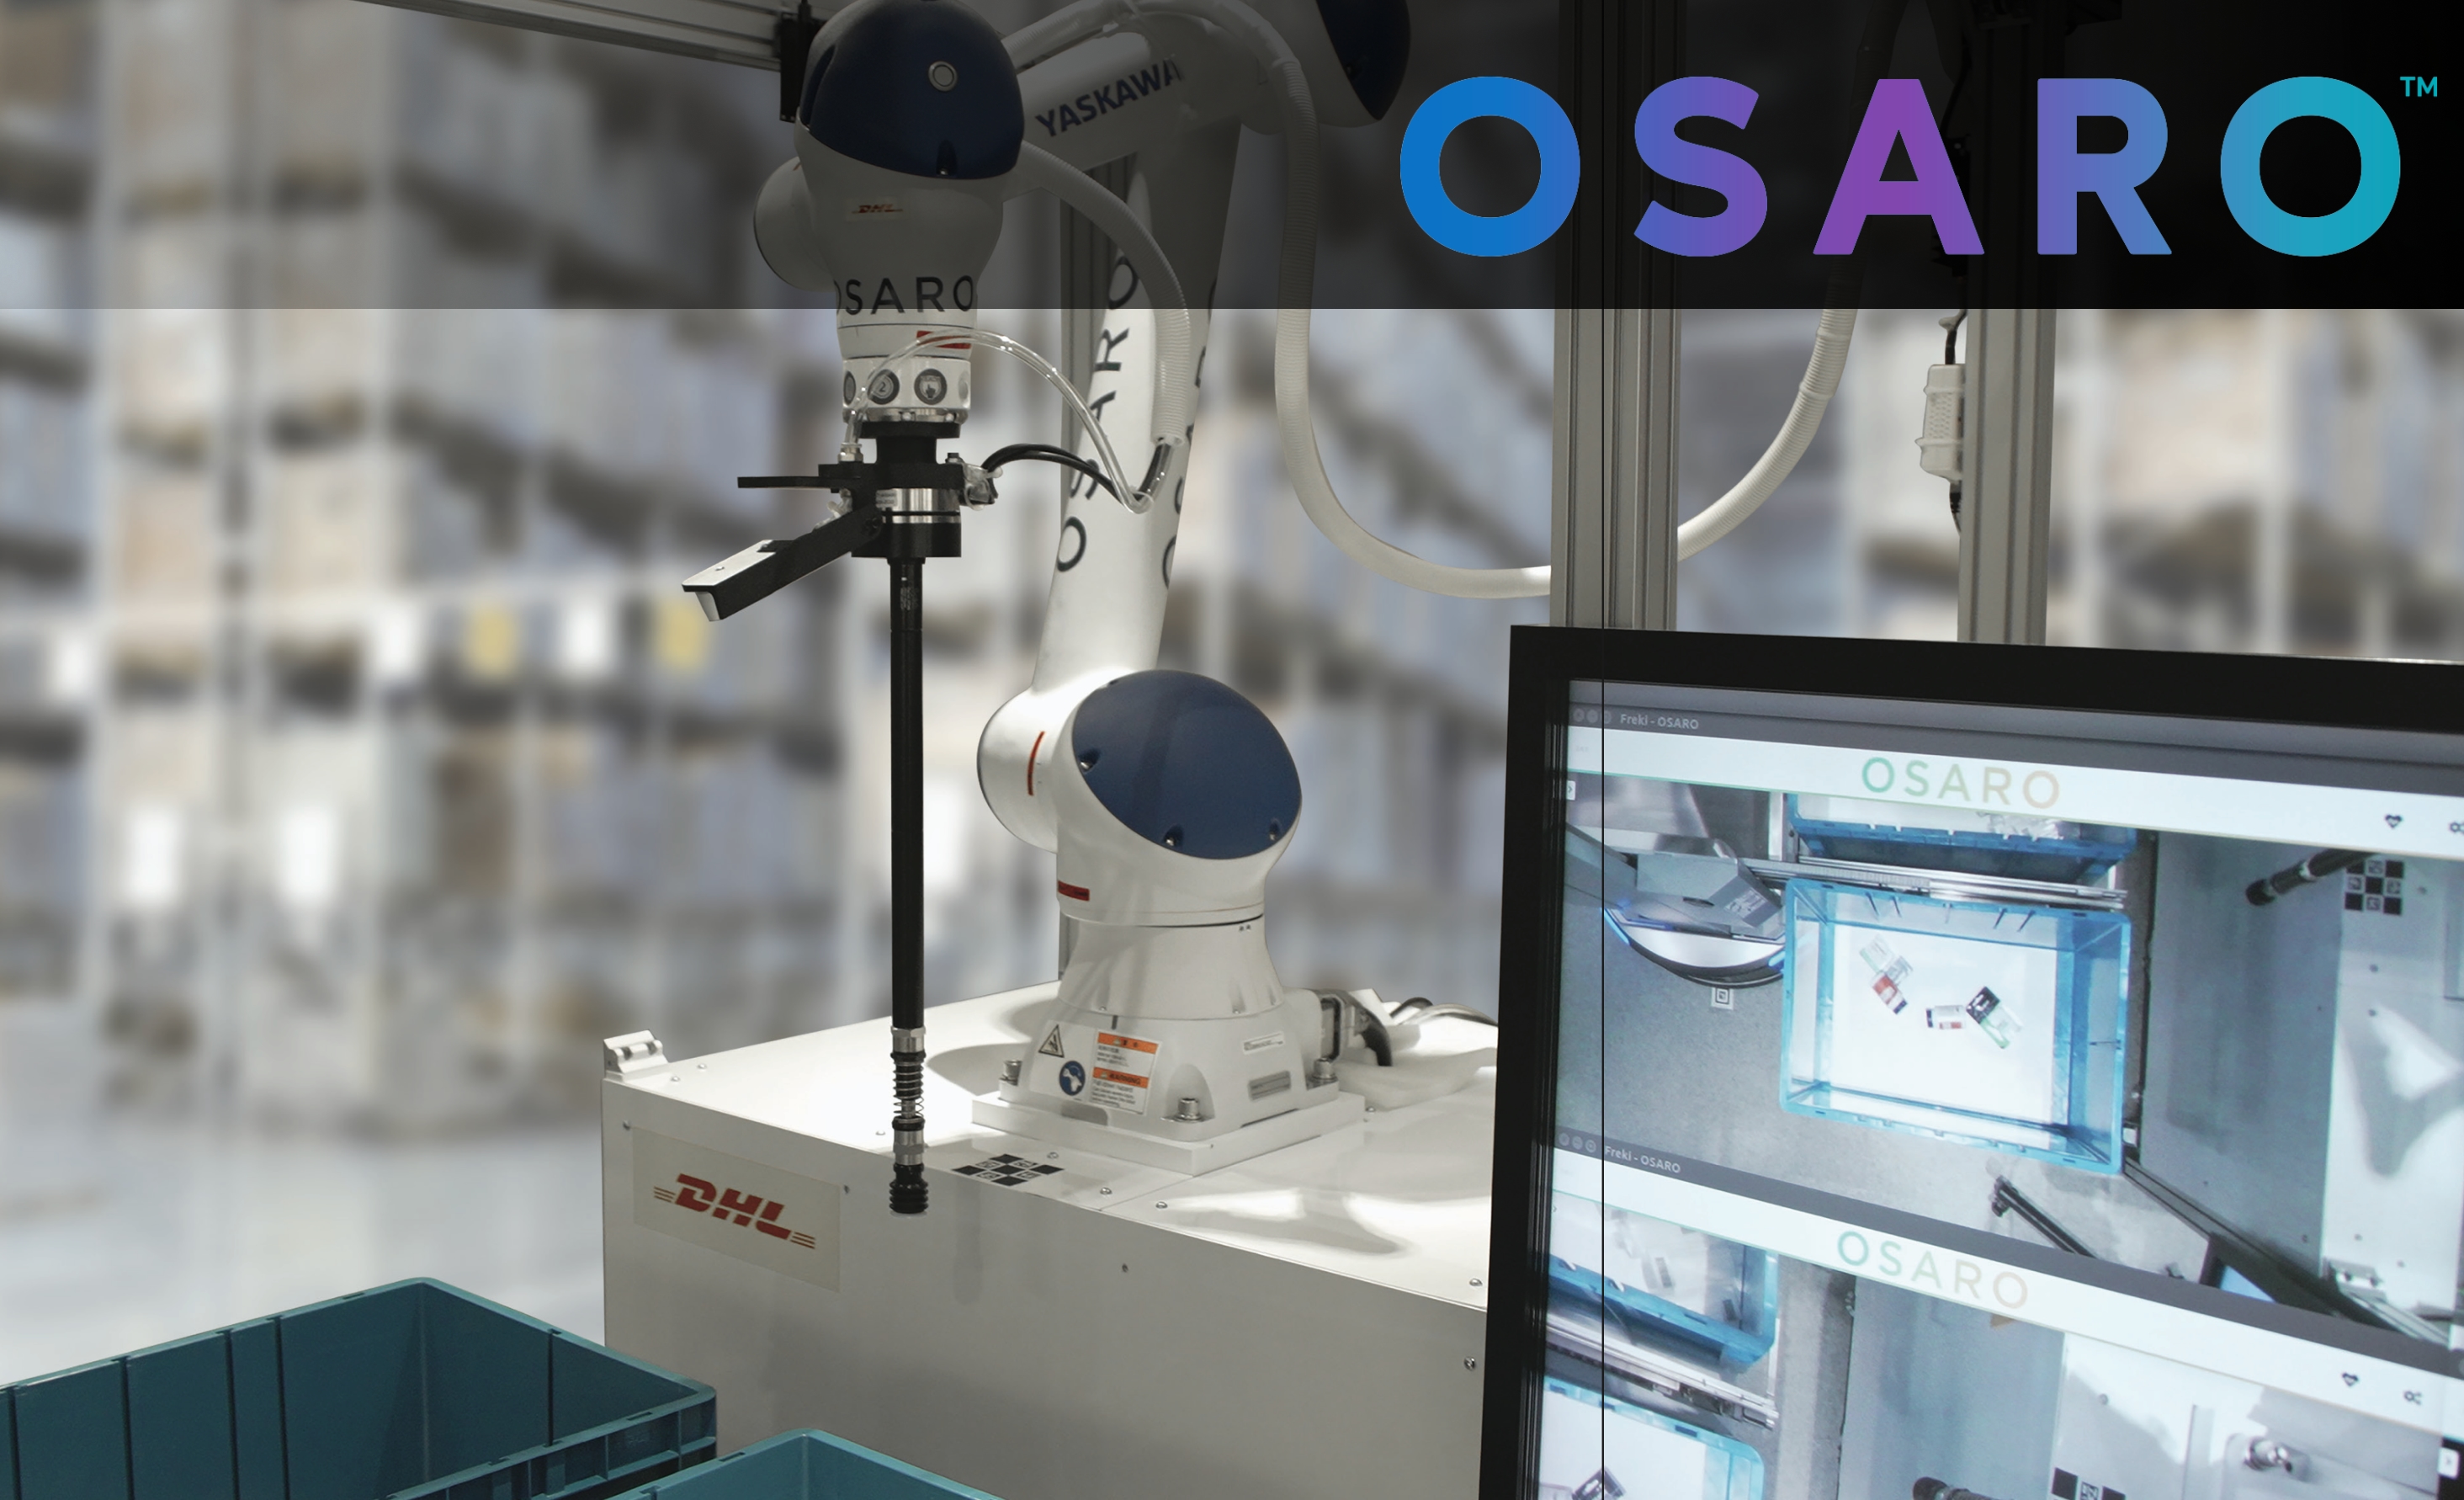 OSARO delivers best-in-class robotic piece-picking solutions for e-commerce where key challenges include high SKU inventories, complex packaging, and fragile items.